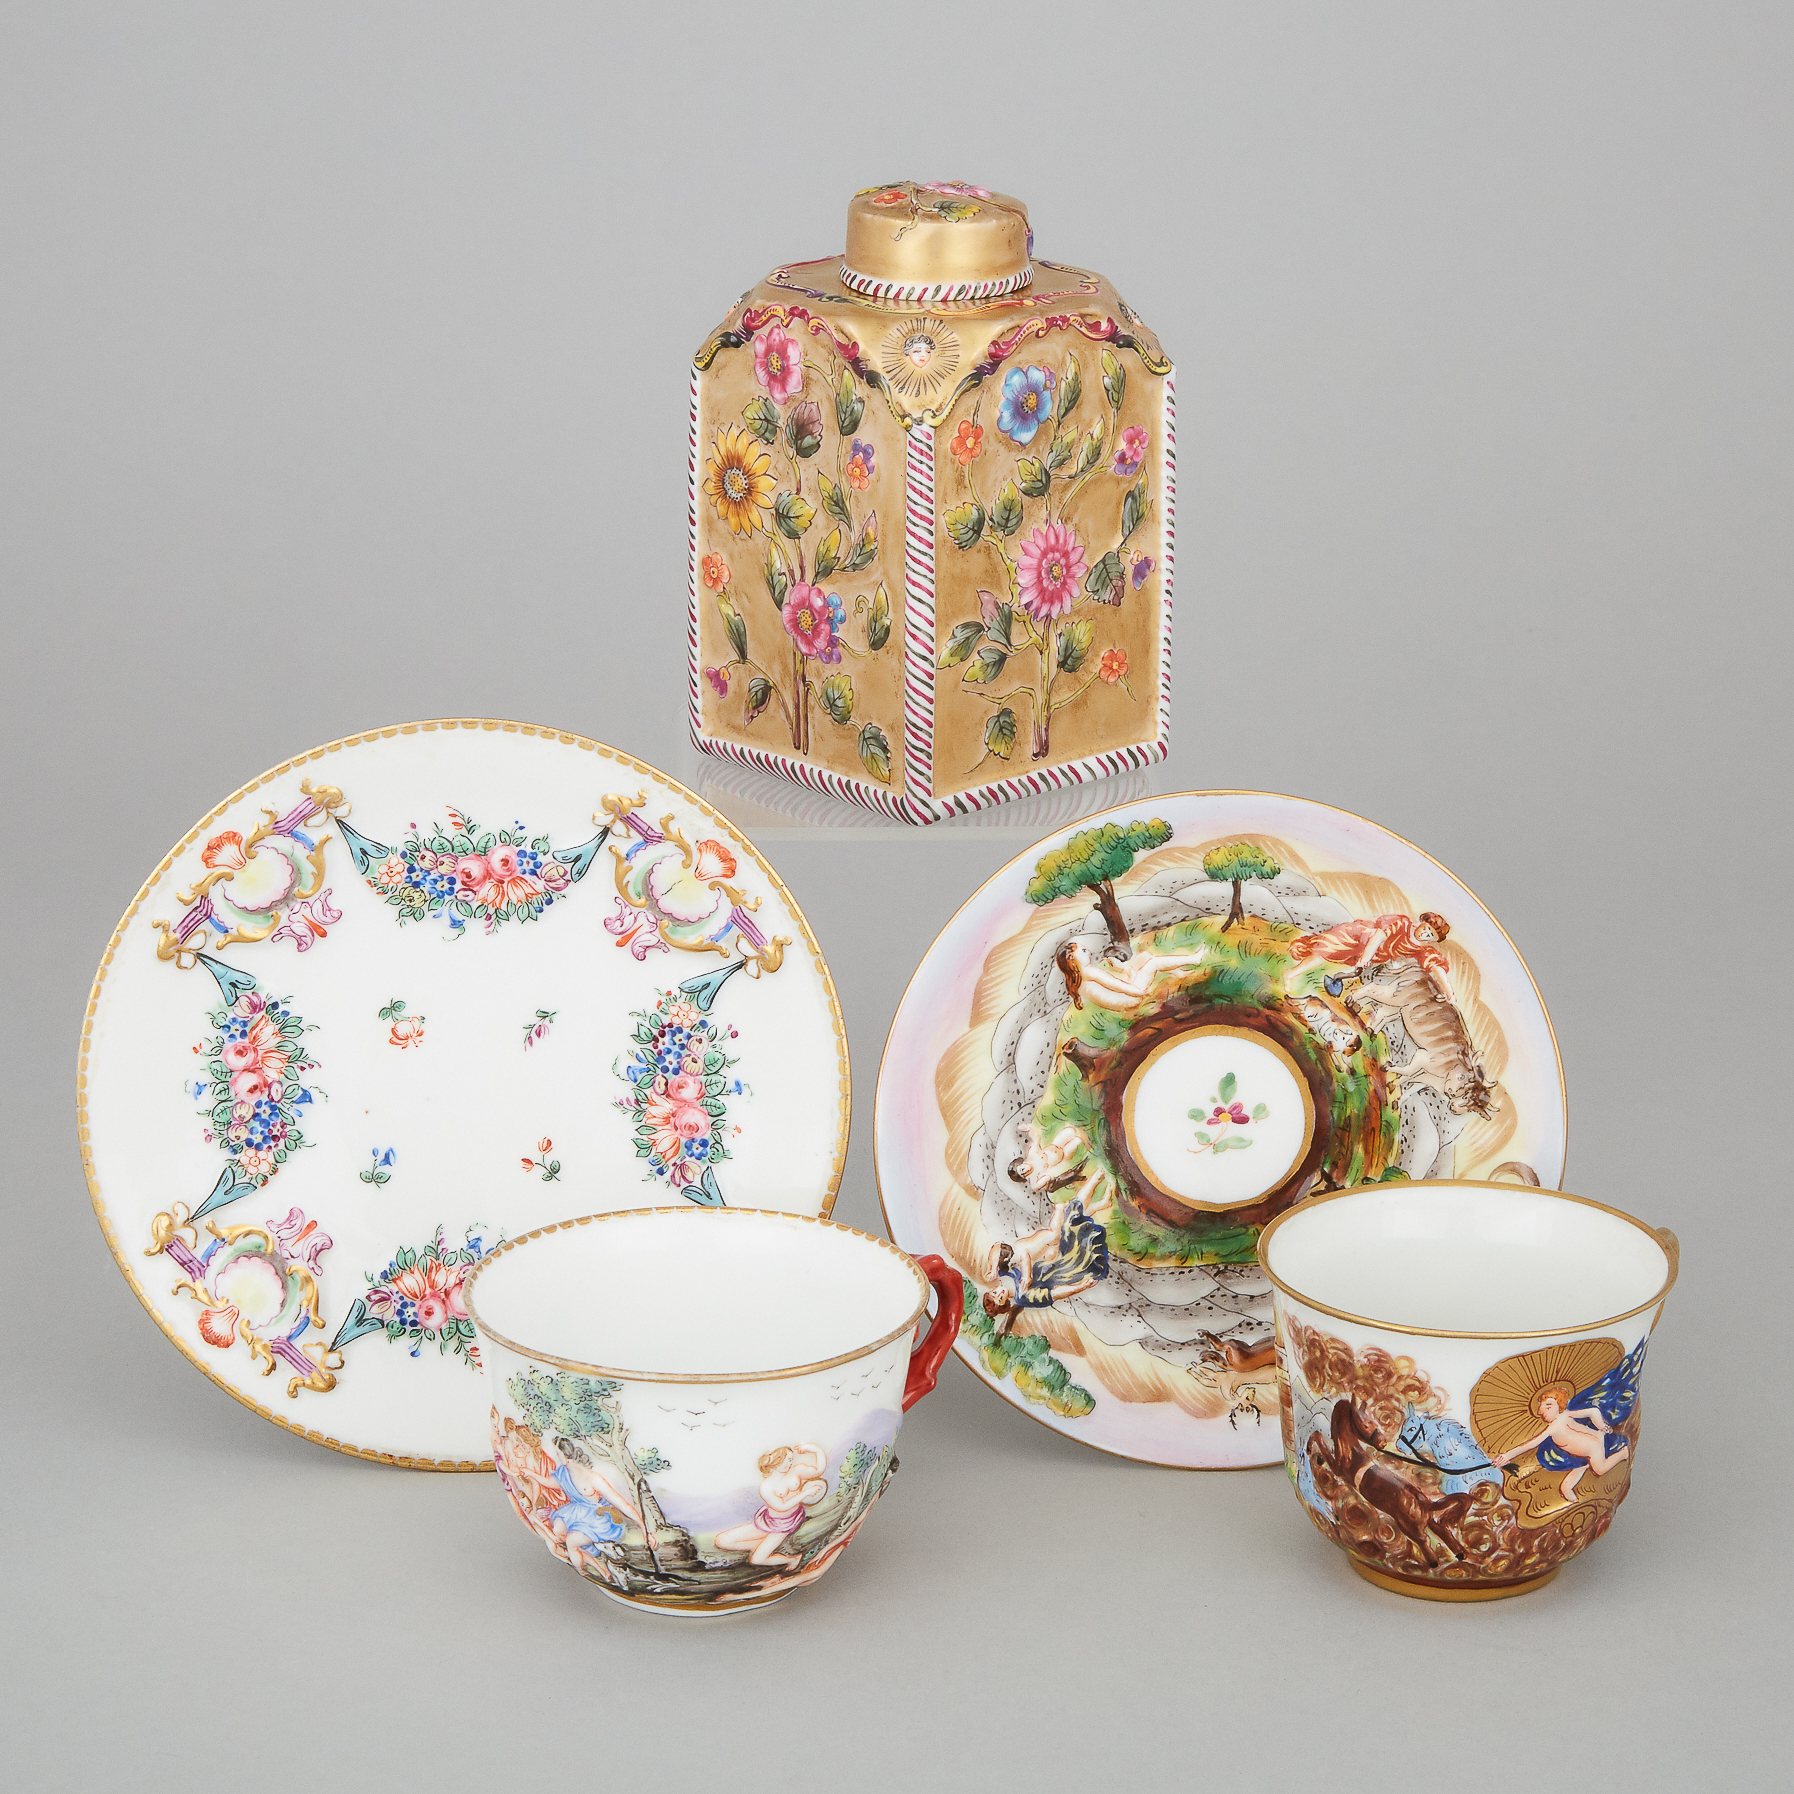 'Naples' Tea Caddy and Two Cups and Saucers, late 19th/early 20th century